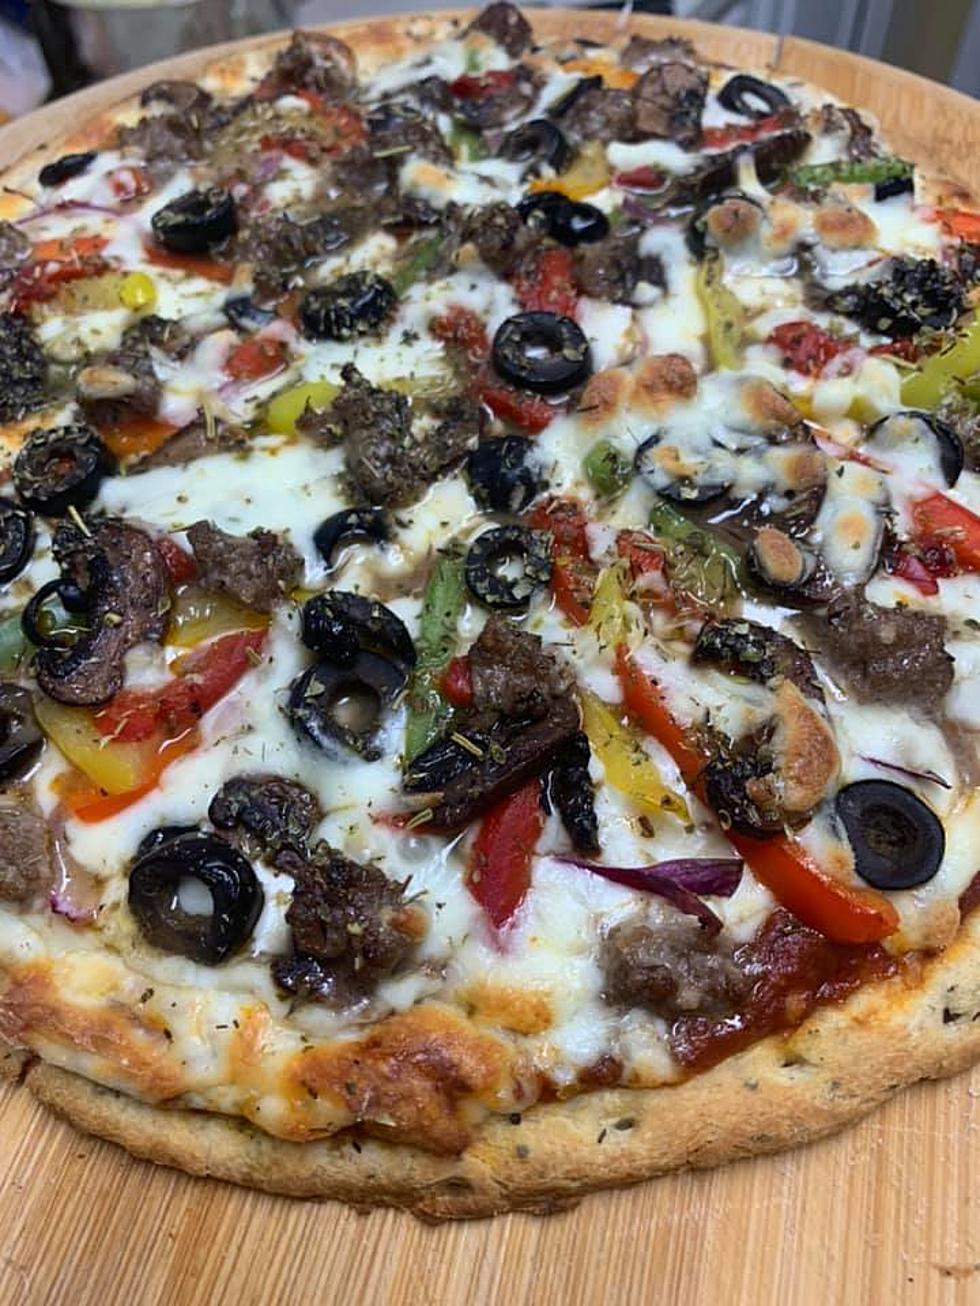 Underground Pizza Texarkana Moving to a Food Truck Downtown